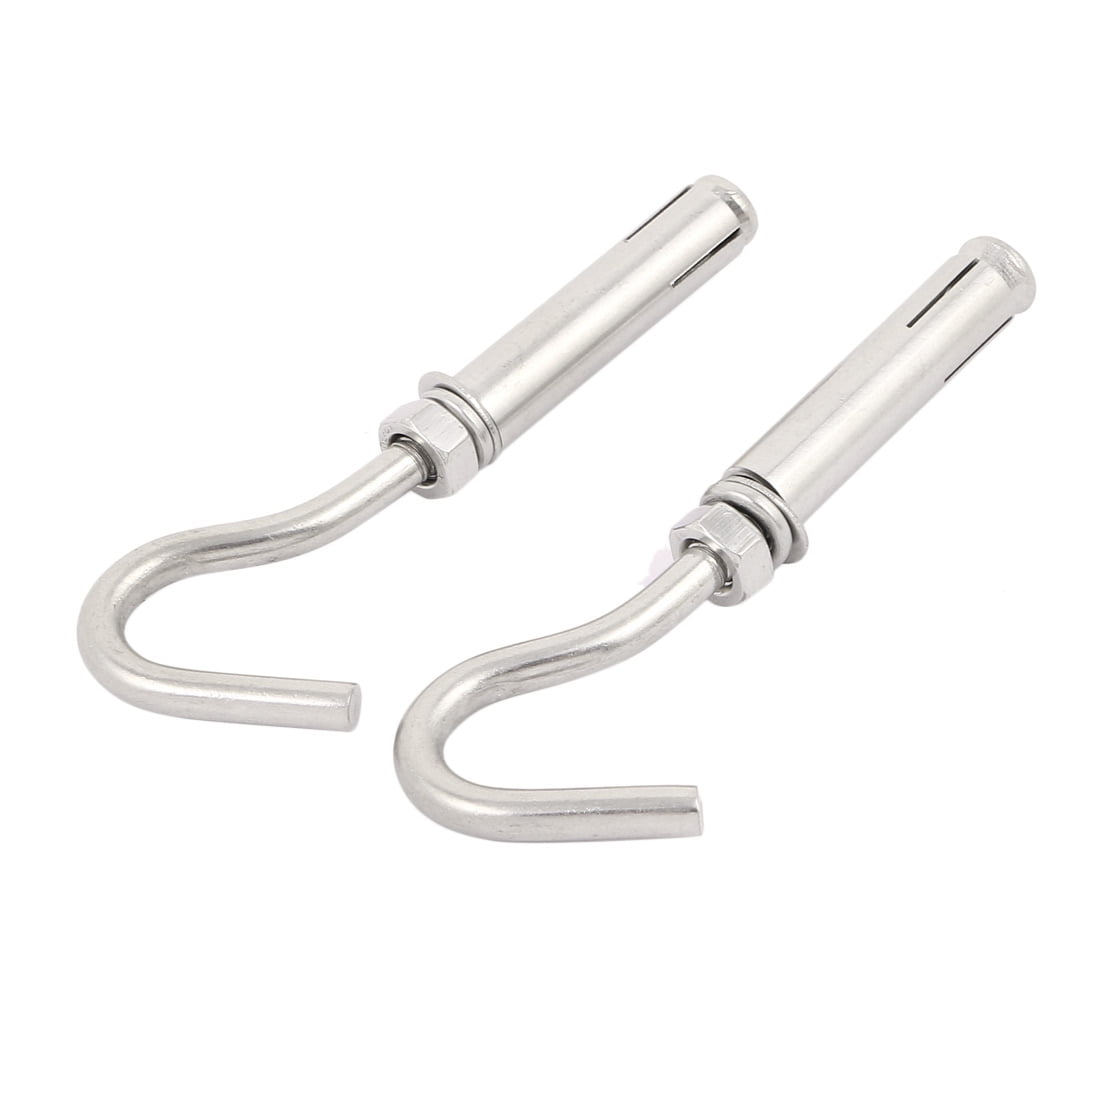 uxcell 2 Pcs Expansion Anchor Bolt Open Cup Hooks M6 Hardware Tool 